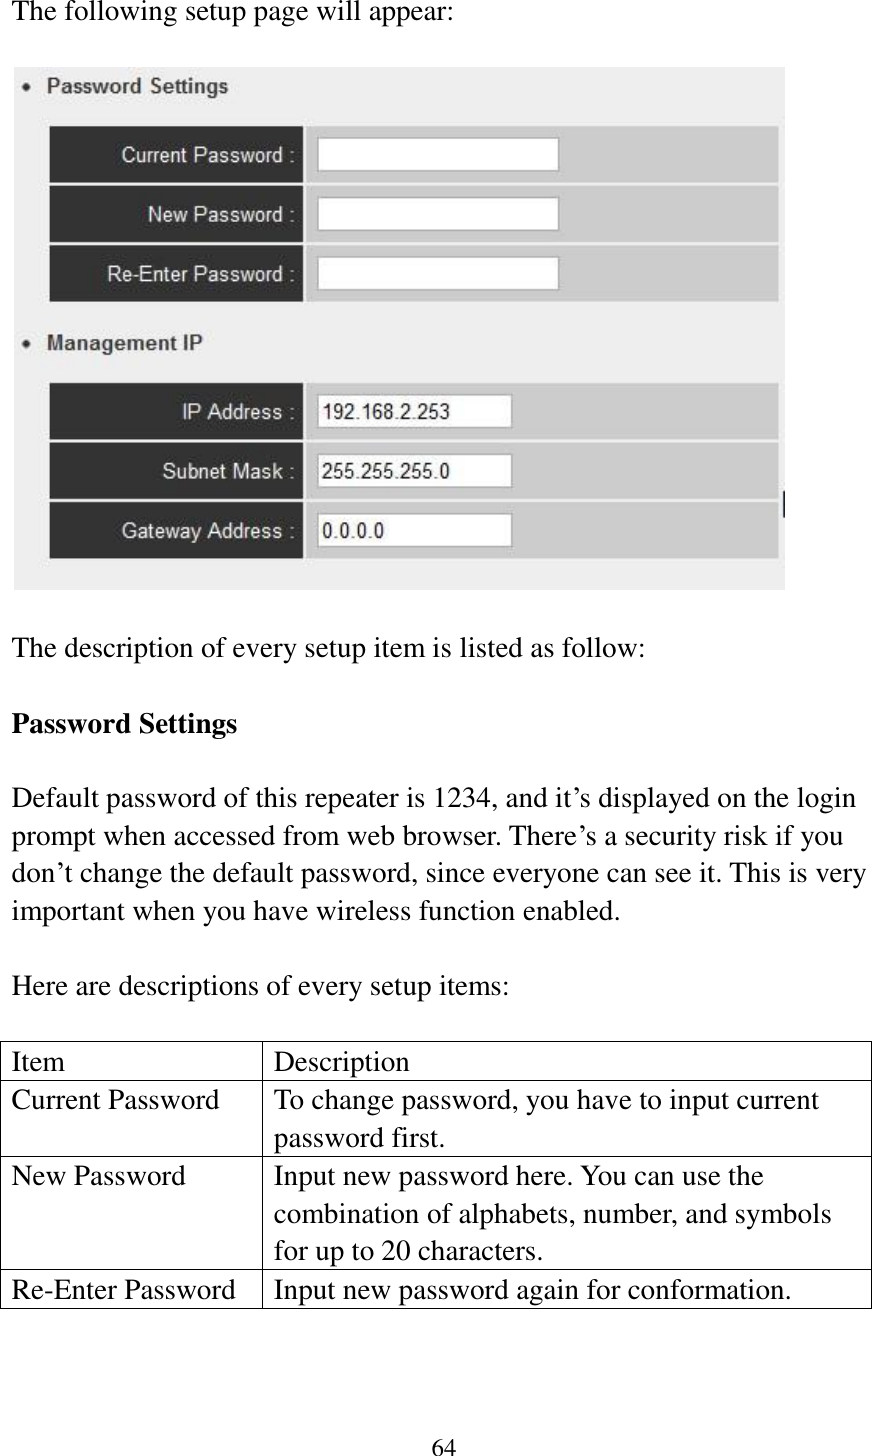 64  The following setup page will appear:    The description of every setup item is listed as follow:  Password Settings  Default password of this repeater is 1234, and it‟s displayed on the login prompt when accessed from web browser. There‟s a security risk if you don‟t change the default password, since everyone can see it. This is very important when you have wireless function enabled.  Here are descriptions of every setup items:  Item Description Current Password To change password, you have to input current password first. New Password Input new password here. You can use the combination of alphabets, number, and symbols for up to 20 characters. Re-Enter Password Input new password again for conformation.  